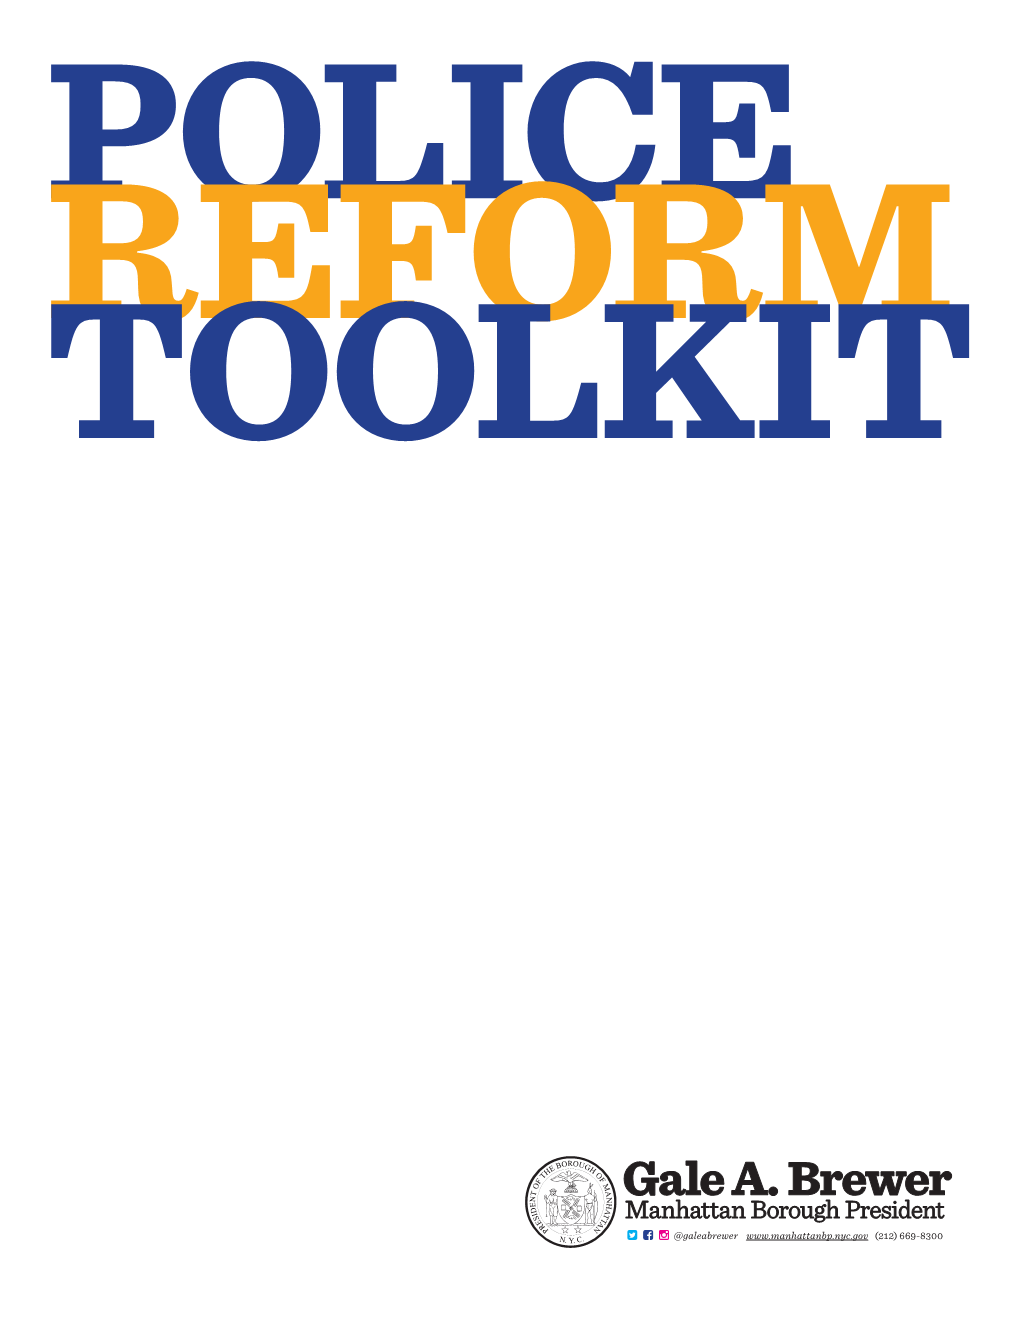 Police Reform Toolkit